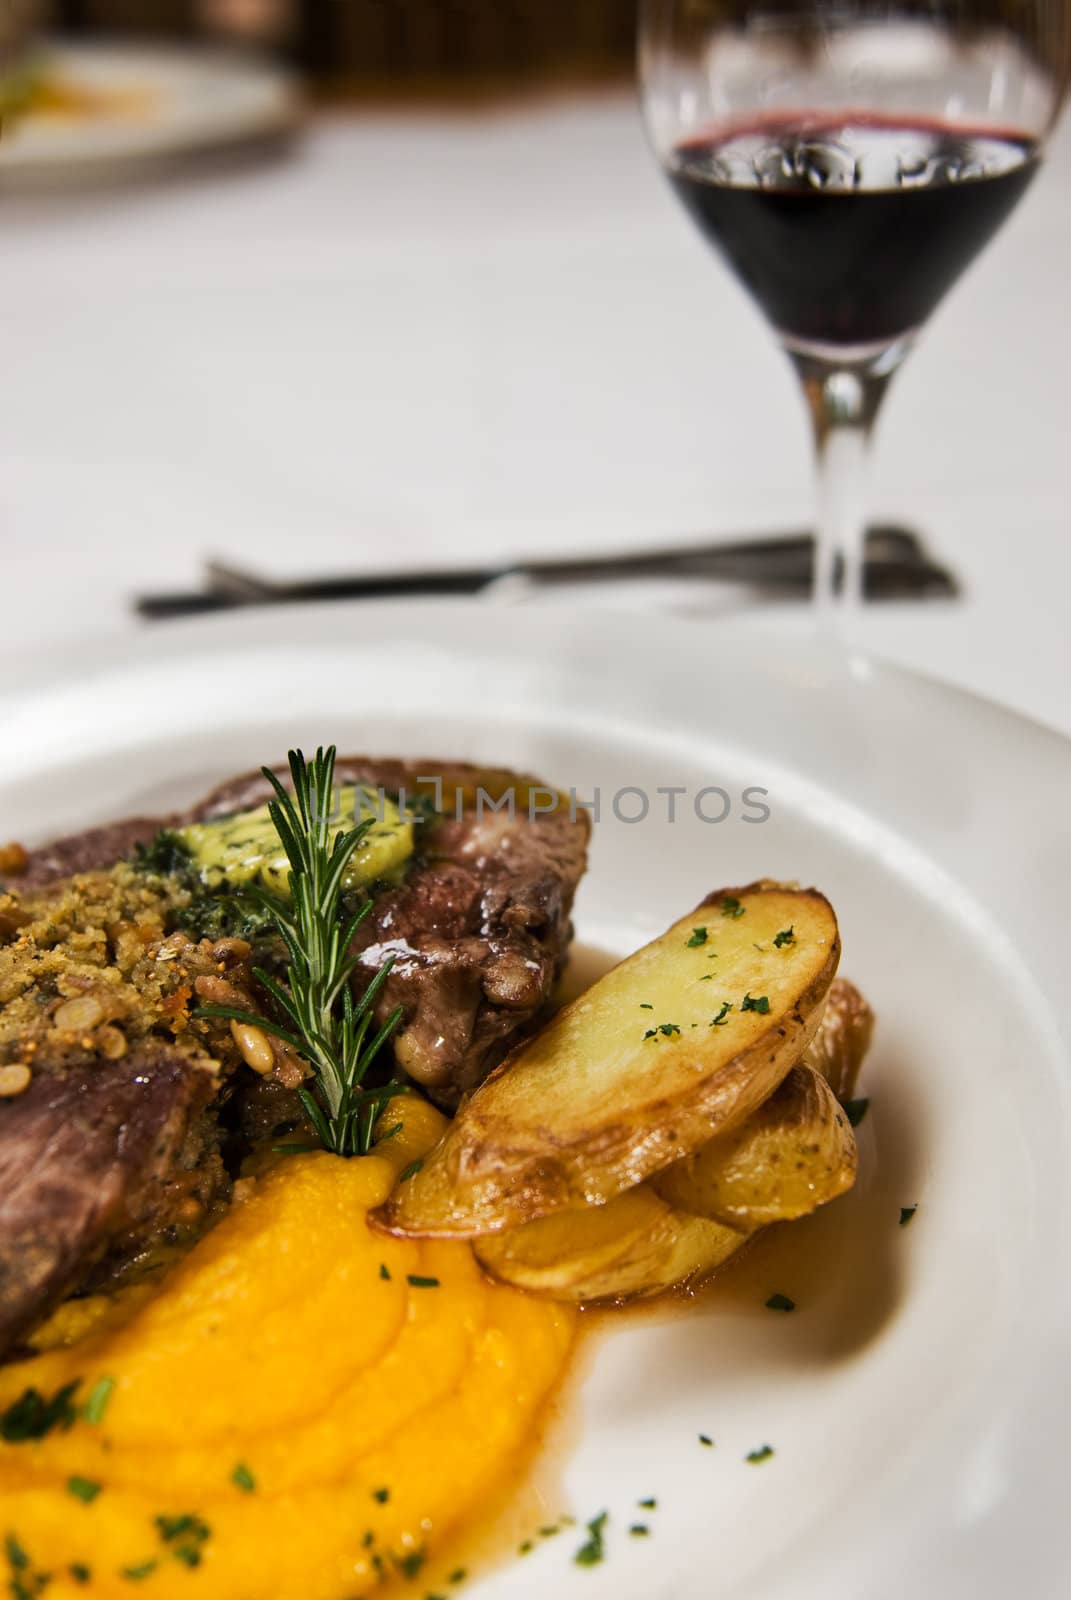 Meat, potato and pumpkin puree, served with red wine.